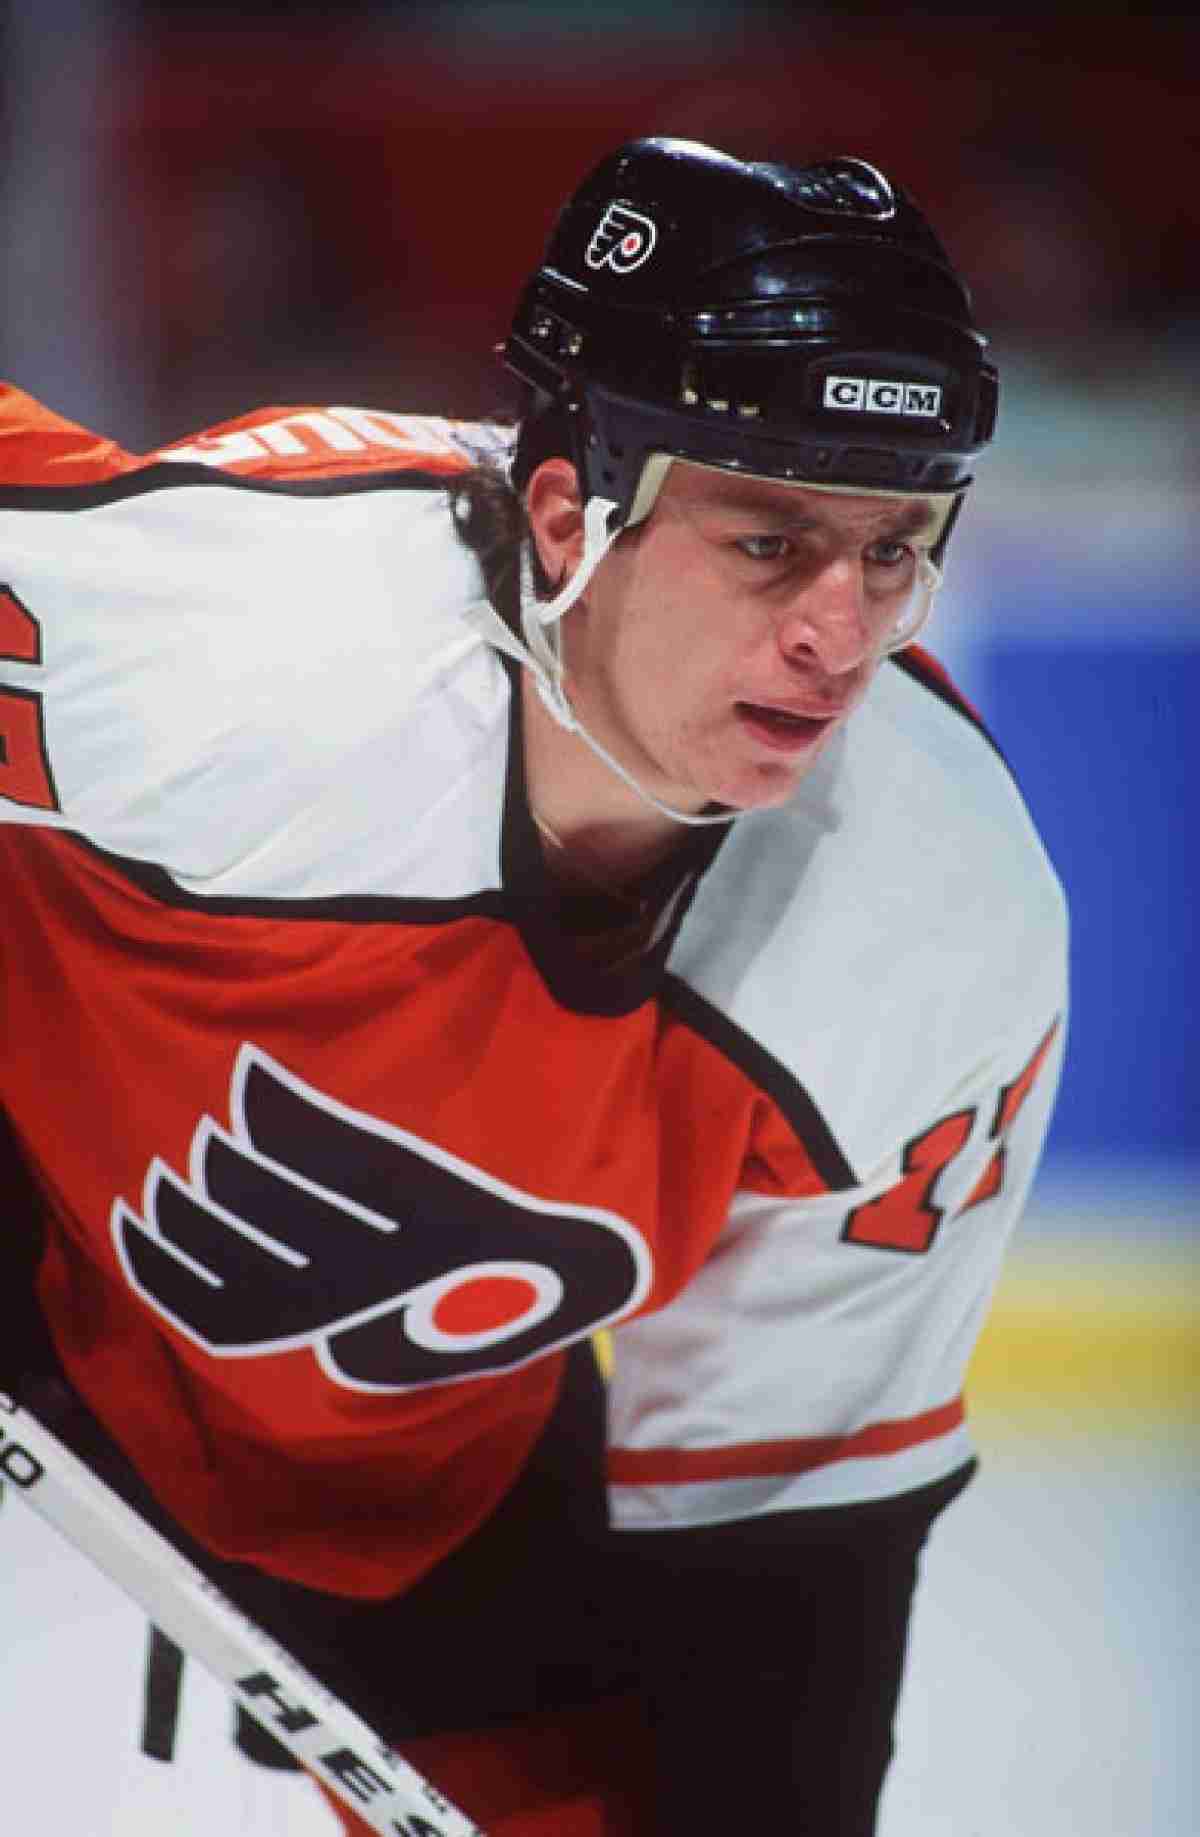 The Chirp  Rod Brind'Amour 